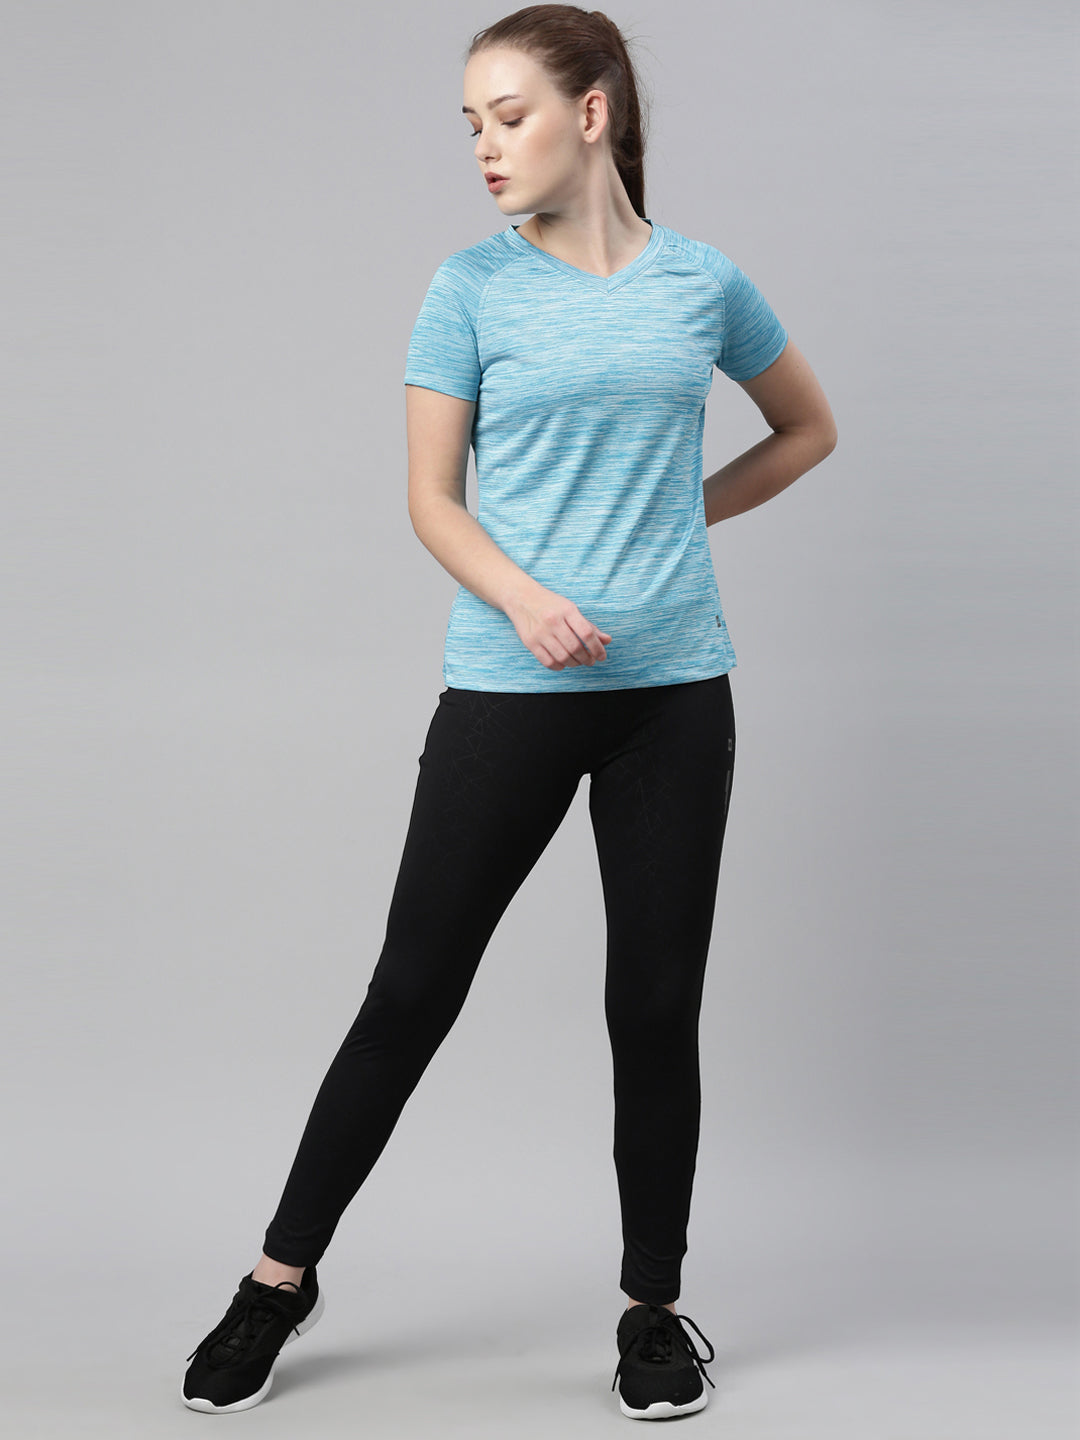 HARPER (100% MICRO POLYESTER V NECK AND RAGLAN SLEEVES FOR WOMENS)